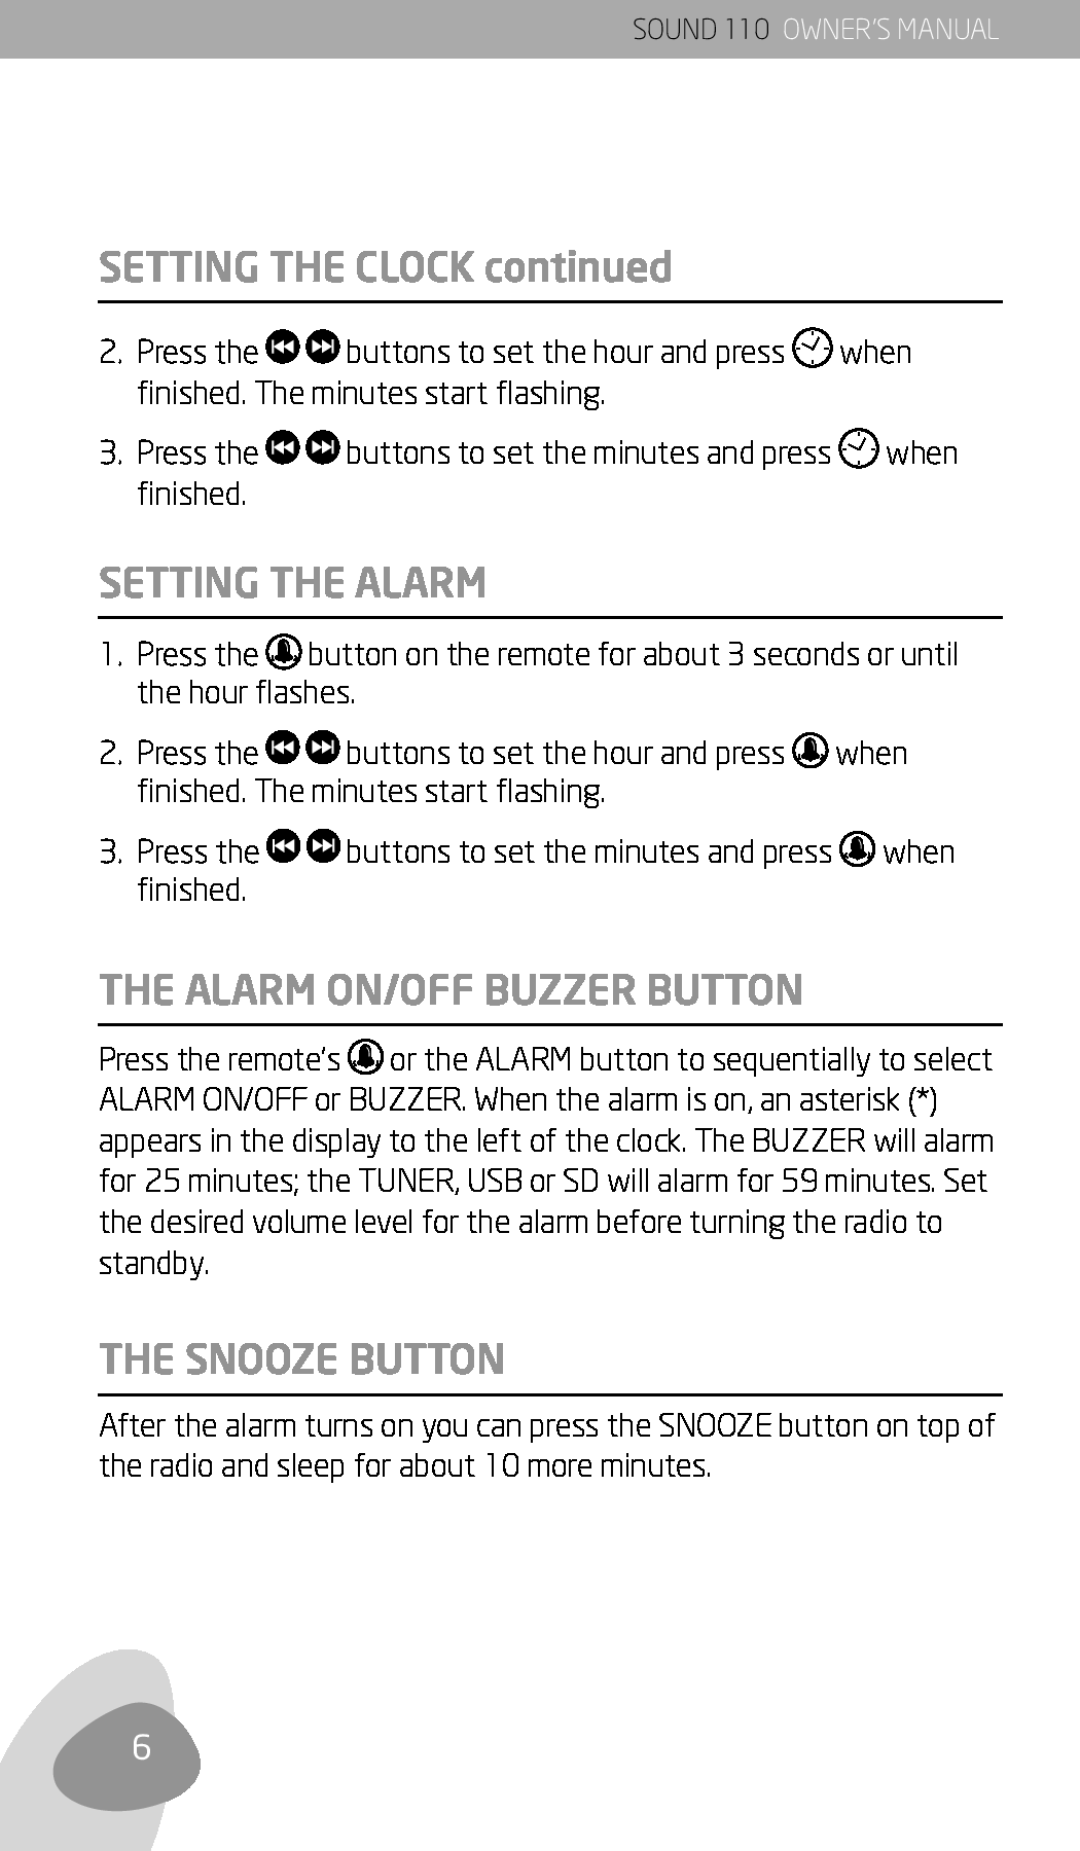 Eton 110 owner manual SETTING THE CLOCK continued, Setting The Alarm, The Alarm On/Off Buzzer Button, The Snooze Button 